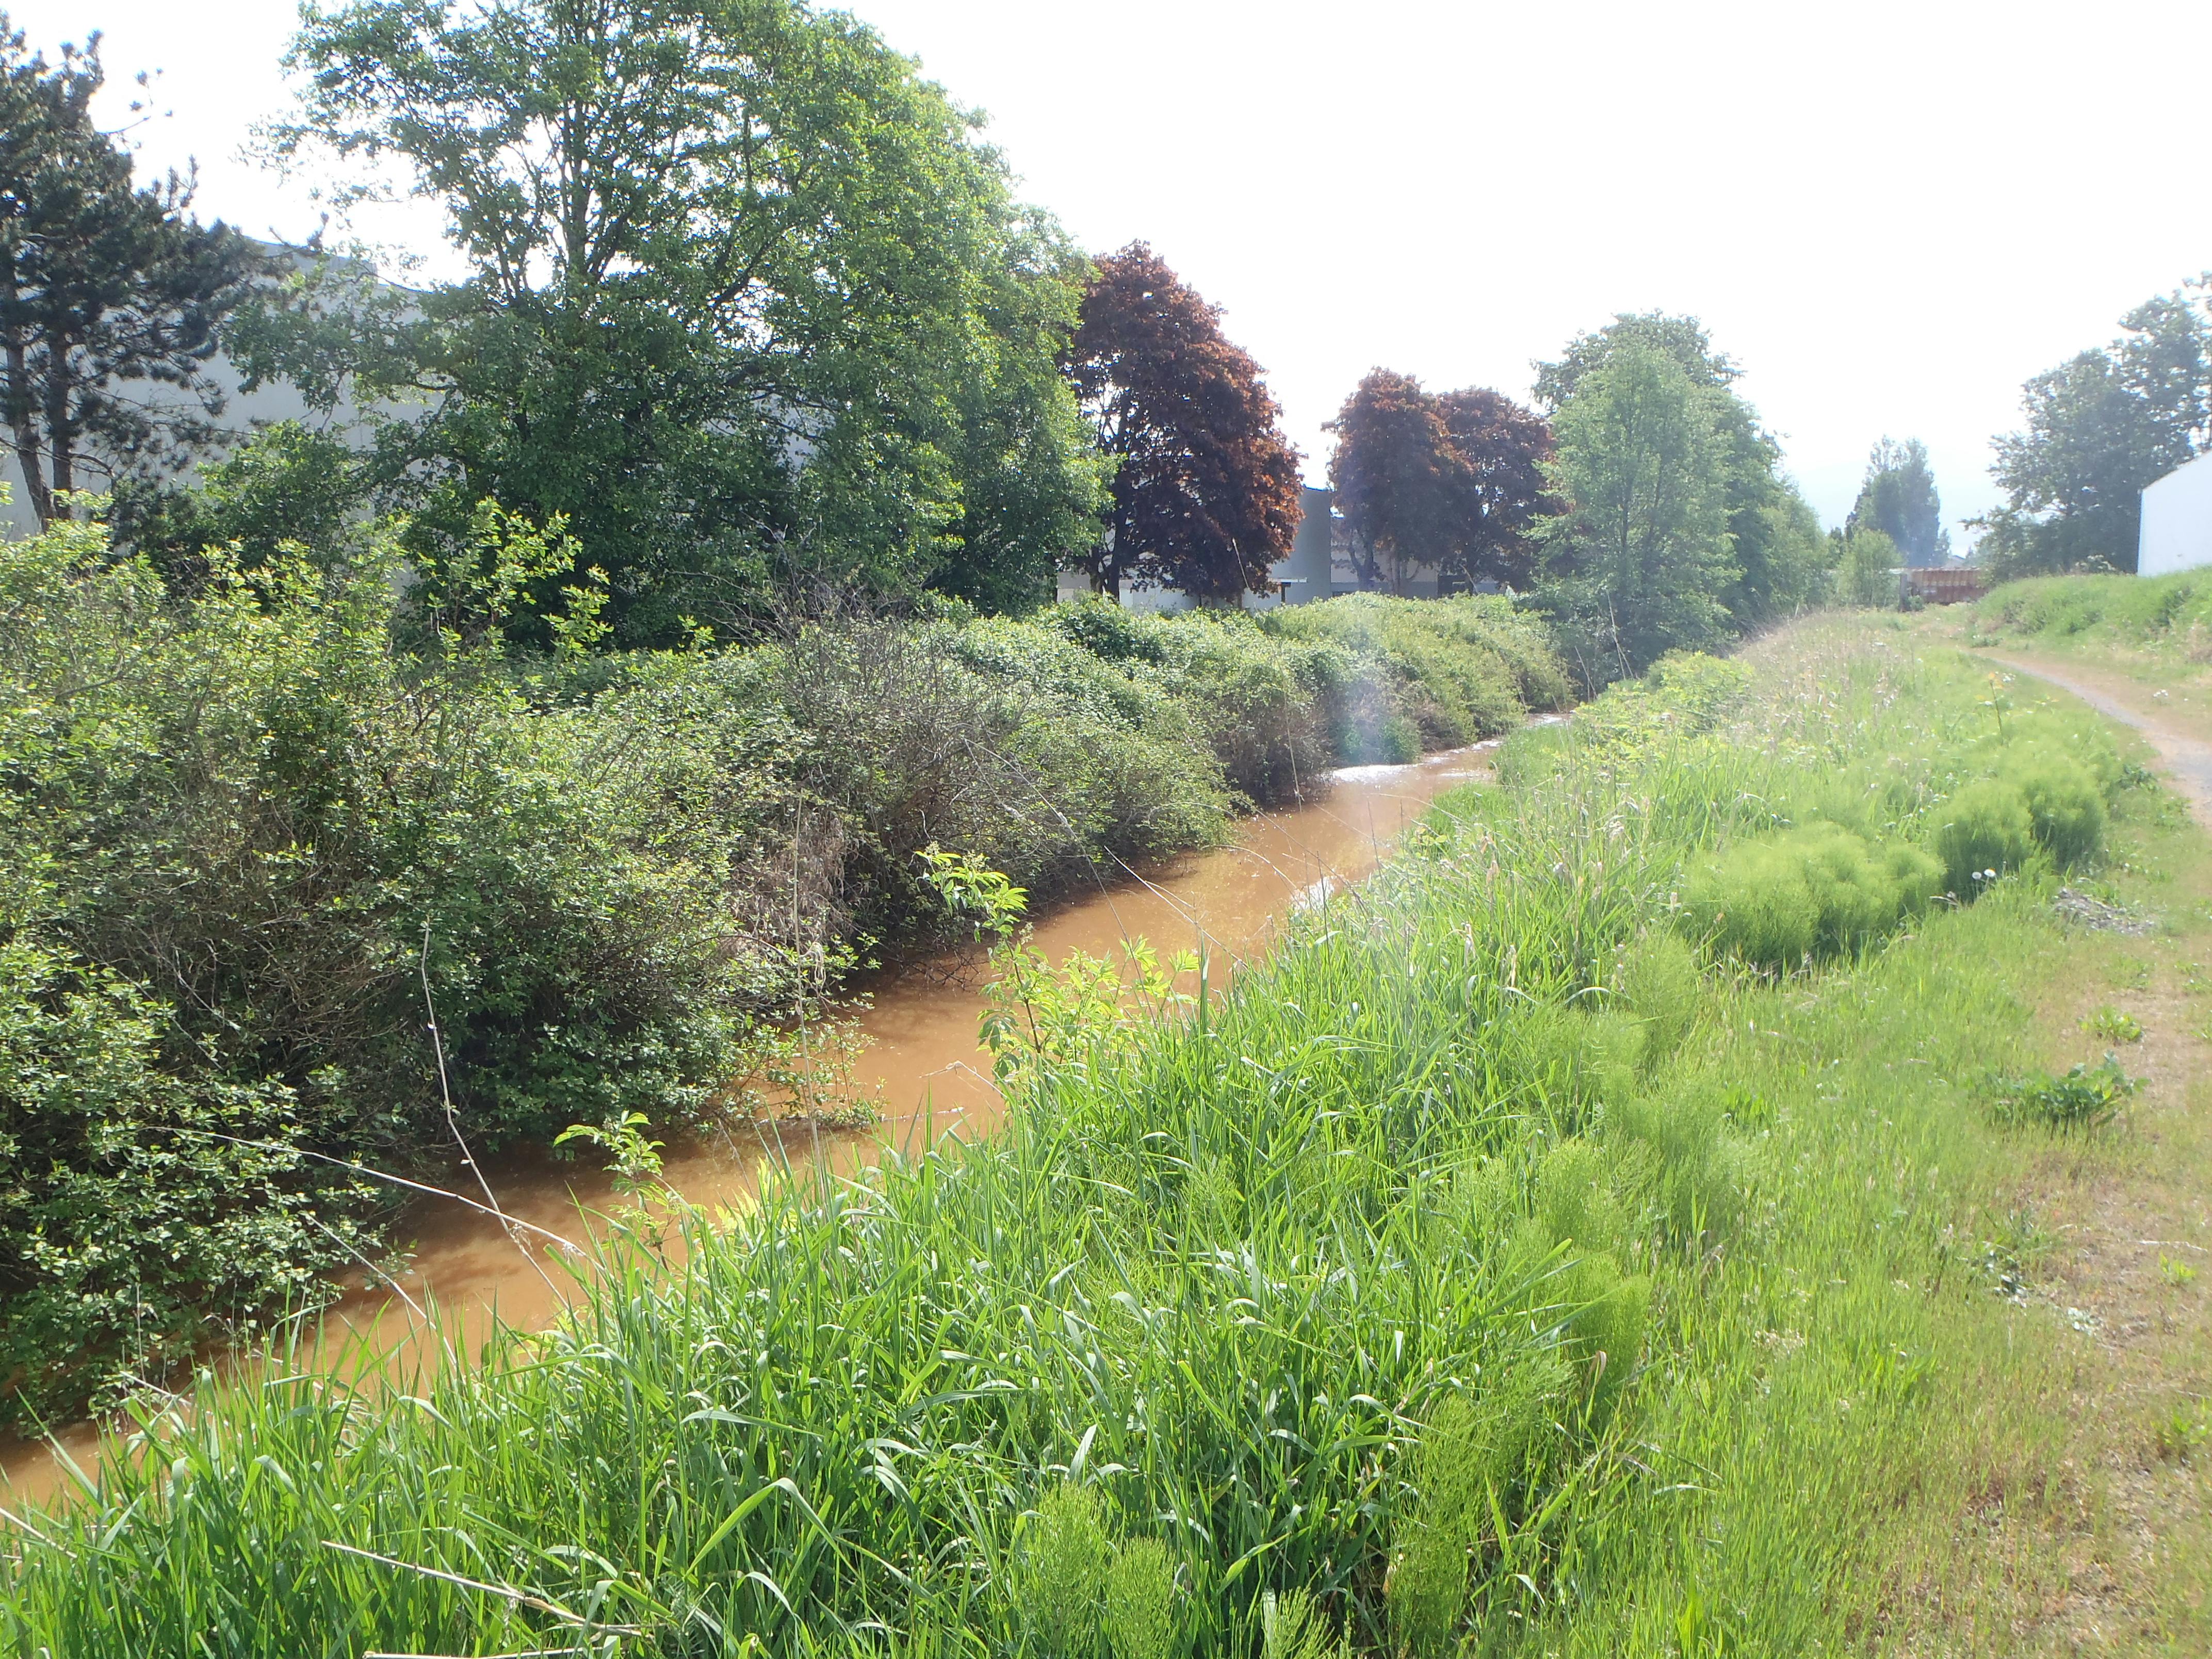 Our strategy supports the preservation of ditches and open watercourses, which serve to improve water and habitat quality, flood mitigation and conveyance, provide community amenities and connect existing isolated ecological lands.